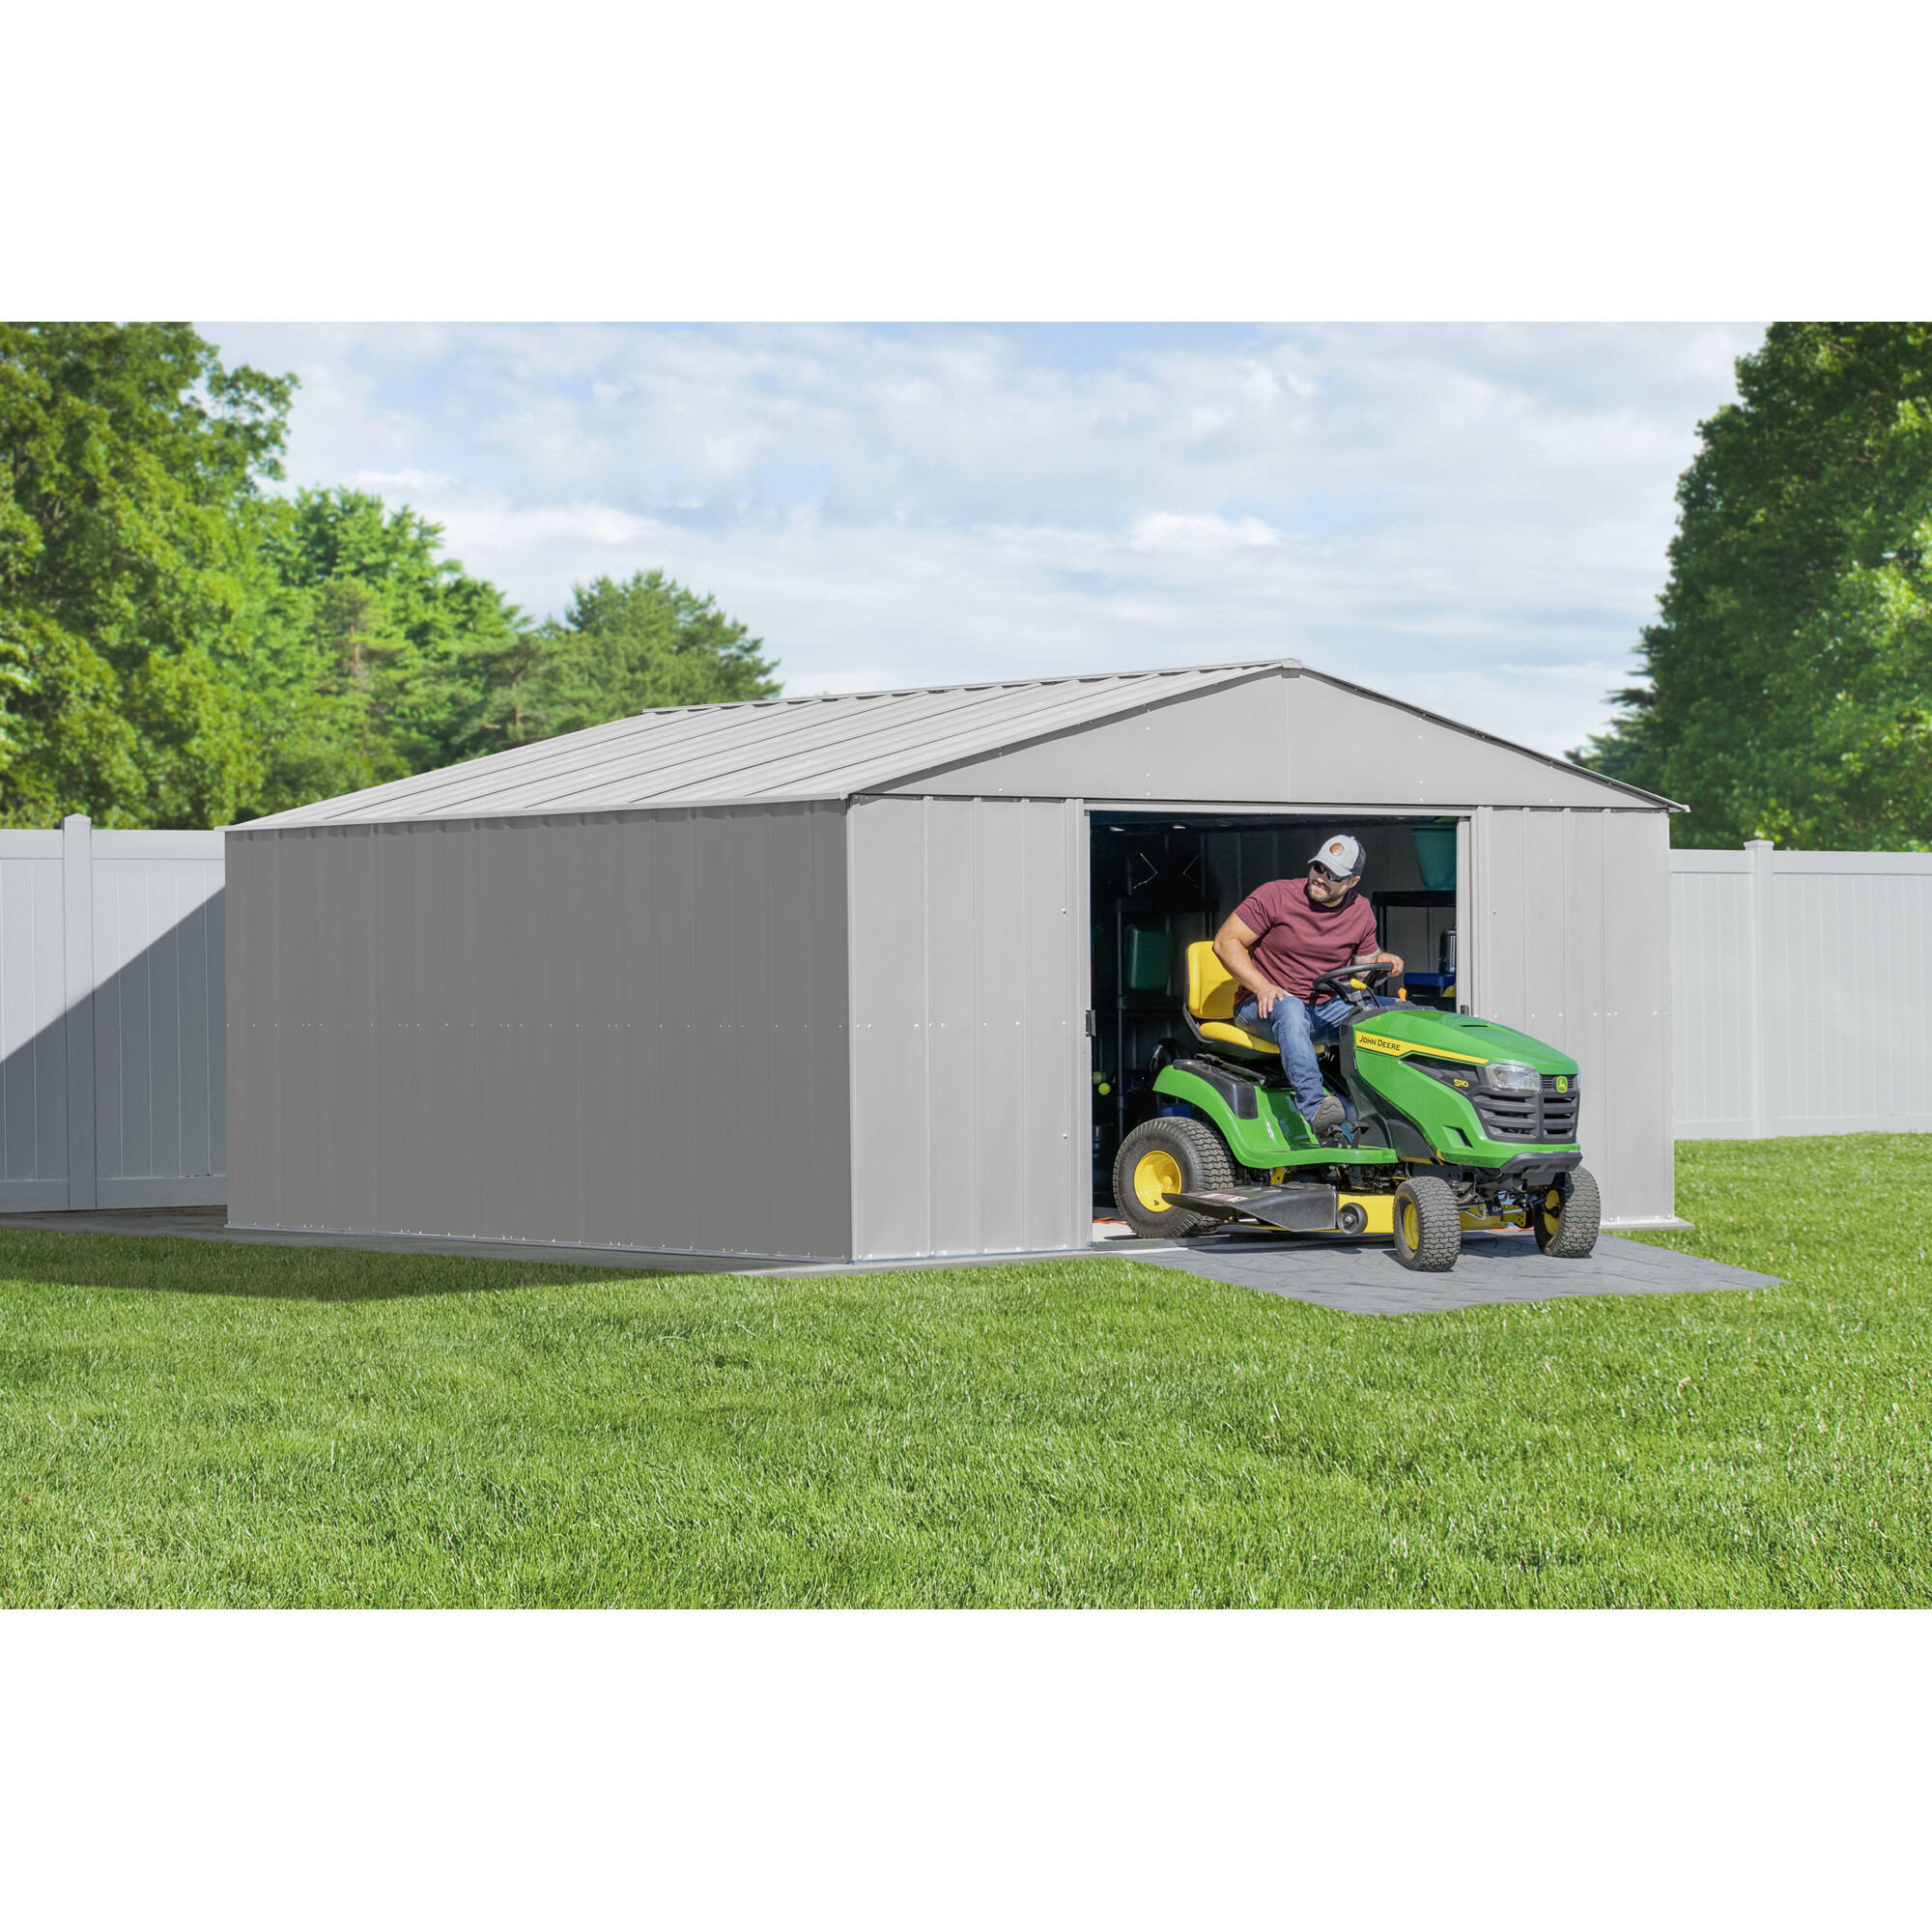 Arrow Storage Products, Classic Metal Shed, 14 x 14 Flute Grey, Length 15 ft, Width 14 ft, Model CLG1414FG